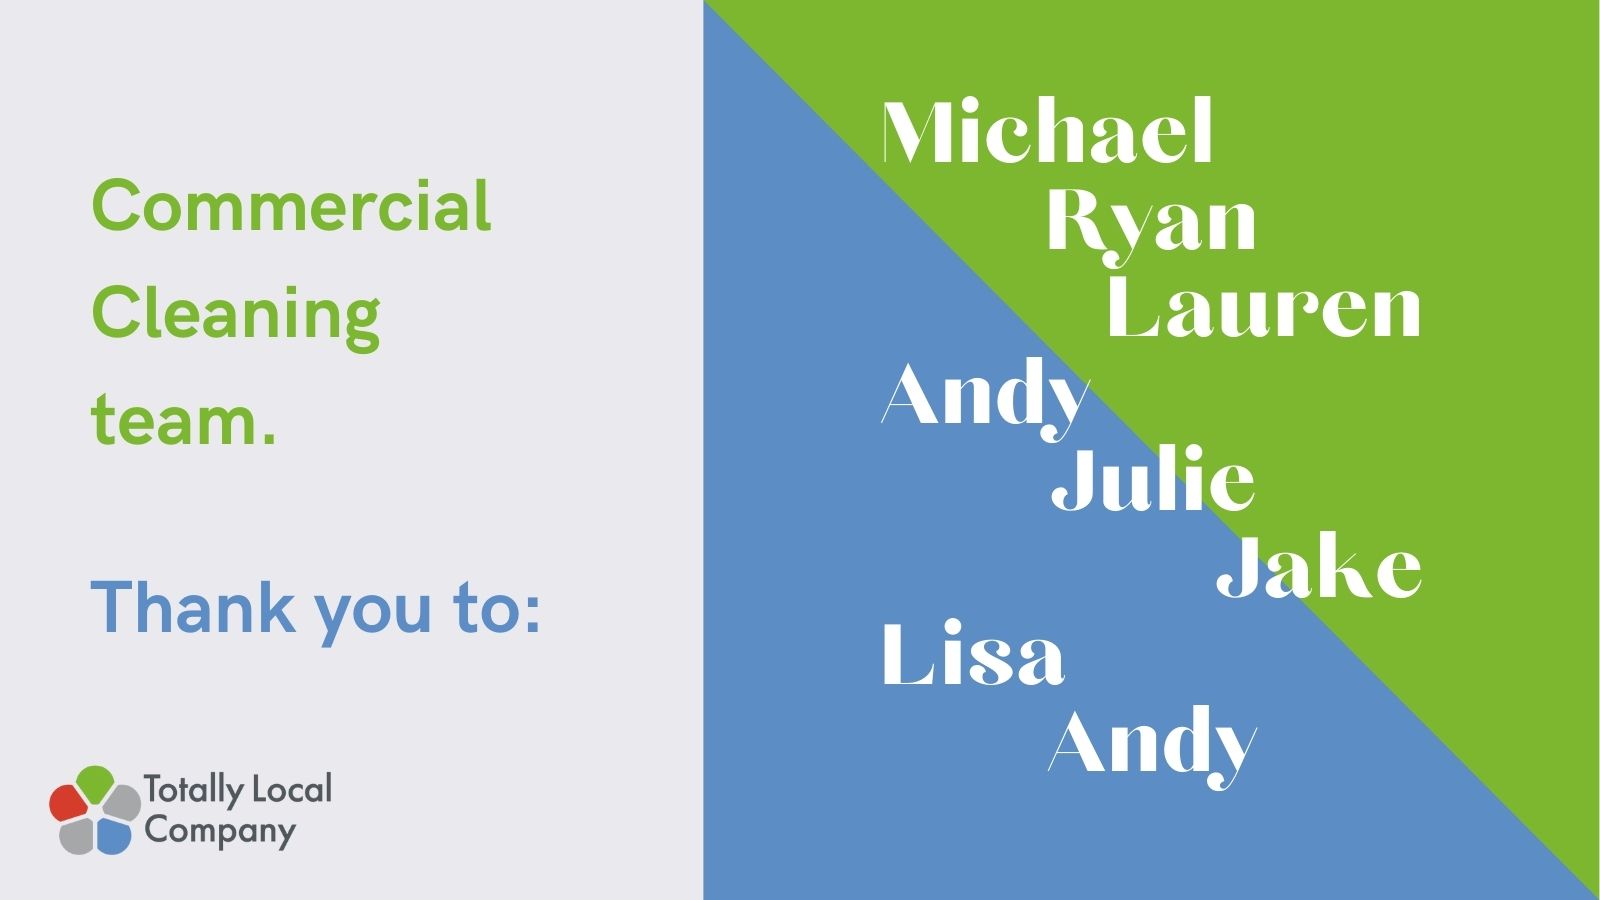 wording - commercial cleaning thank you to Michael, Ryan, Lauren, Andy, Julie, Jake, Lisa, Andy, no image but there is a blue and green traingular background behind the names